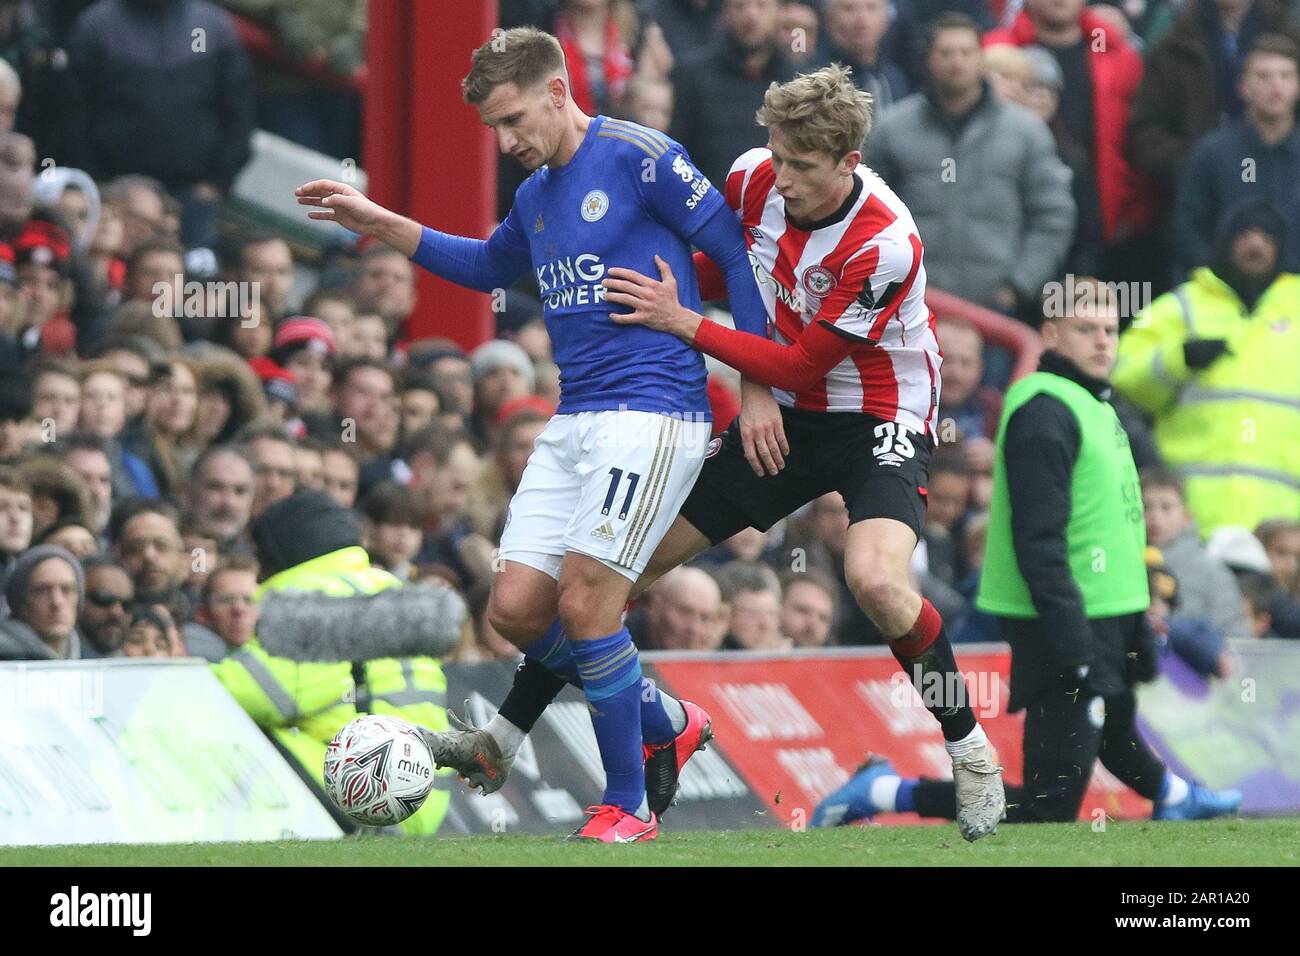 London, UK. 25 January 2020. BRENTFORD, LONDON - JANUARY 25TH Marc Albrighton of Leicester City holding off Mads Roerslev Rasmussen of Brentford during the FA Cup match between Brentford and Leicester City at Griffin Park, London on Saturday 25th January 2020. (Credit: Jacques Feeney | MI News) Photograph may only be used for newspaper and/or magazine editorial purposes, license required for commercial use Credit: MI News & Sport /Alamy Live News Stock Photo